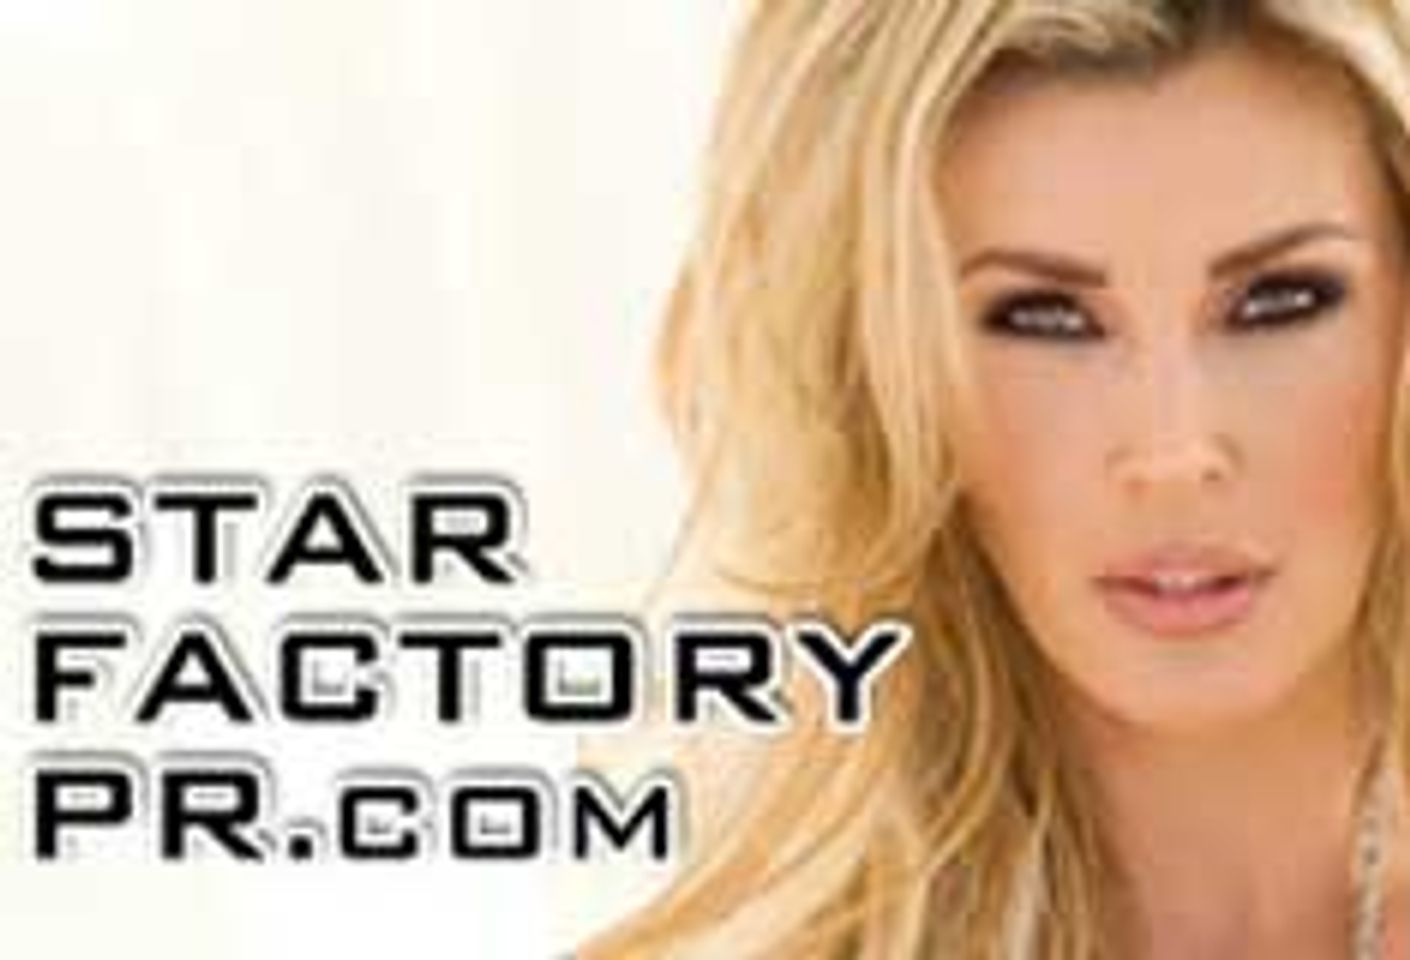 Janine Summers Signs With Star Factory PR, Now Available For Bookings